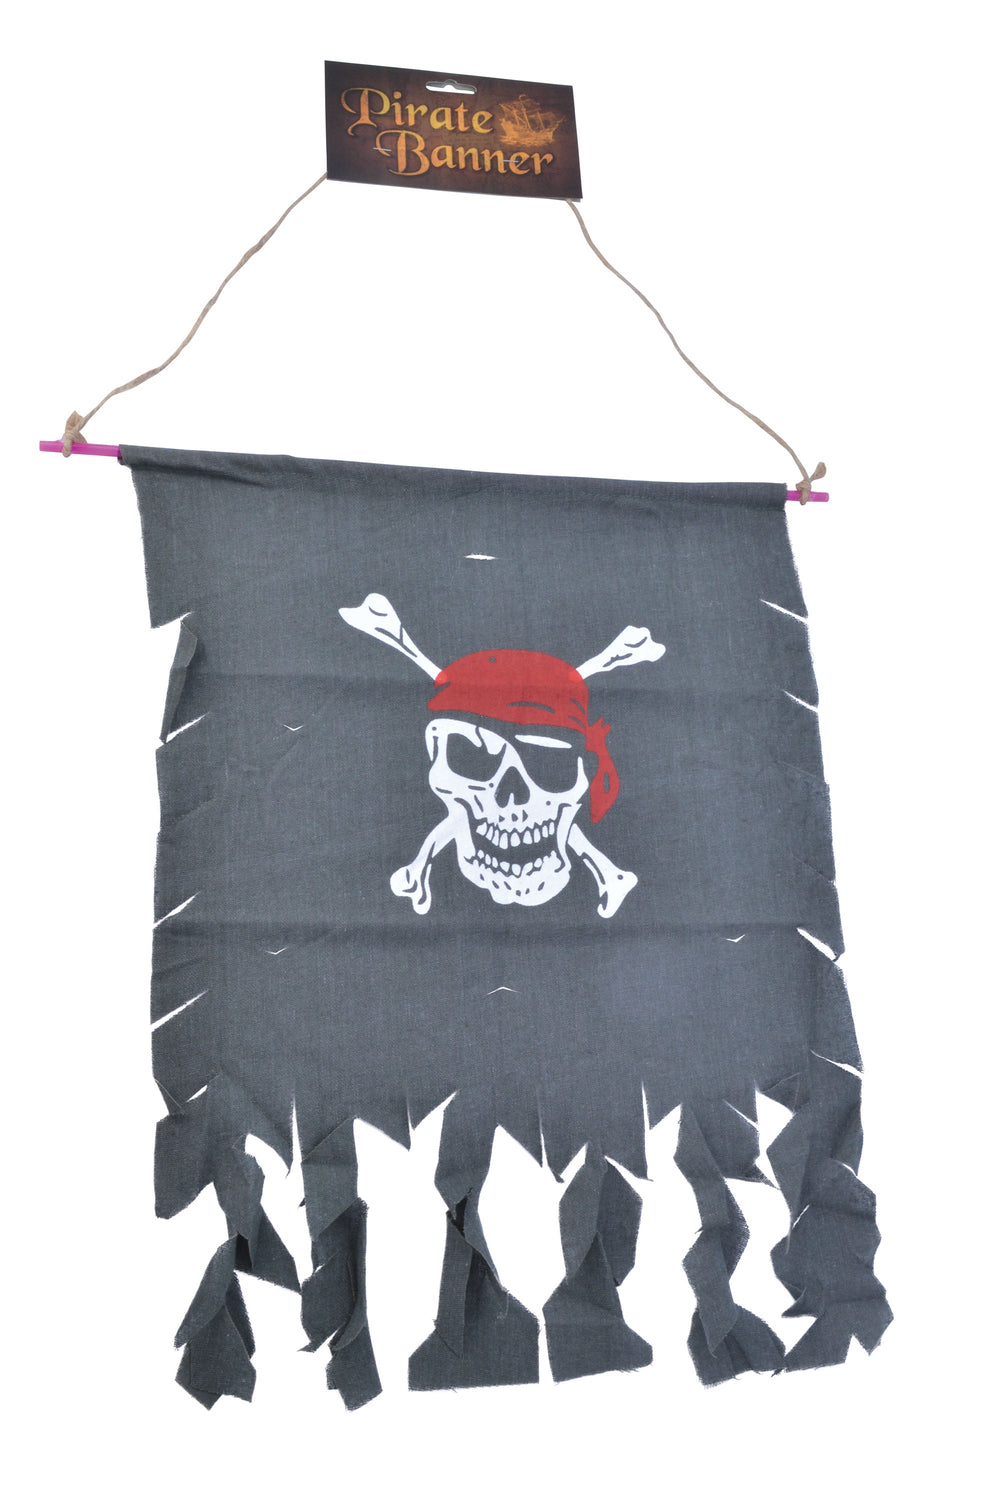 Pirate banner